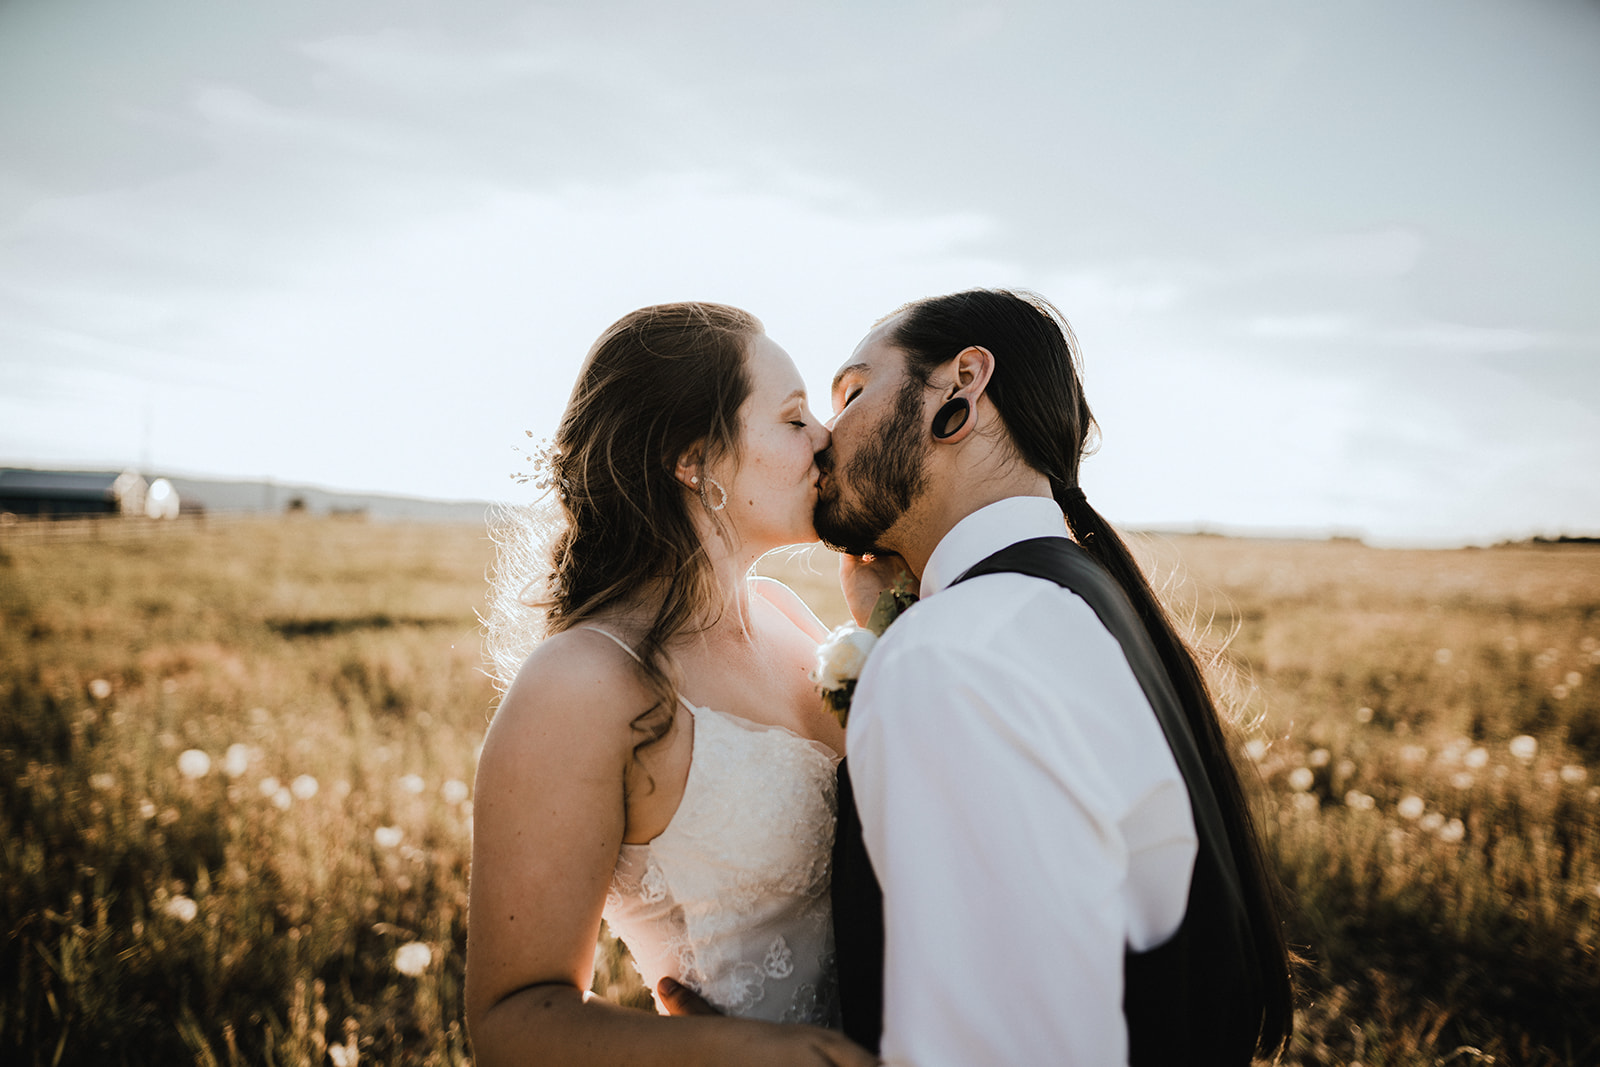 Bride and groom share a kiss in a pasture as the sun sets behind them.